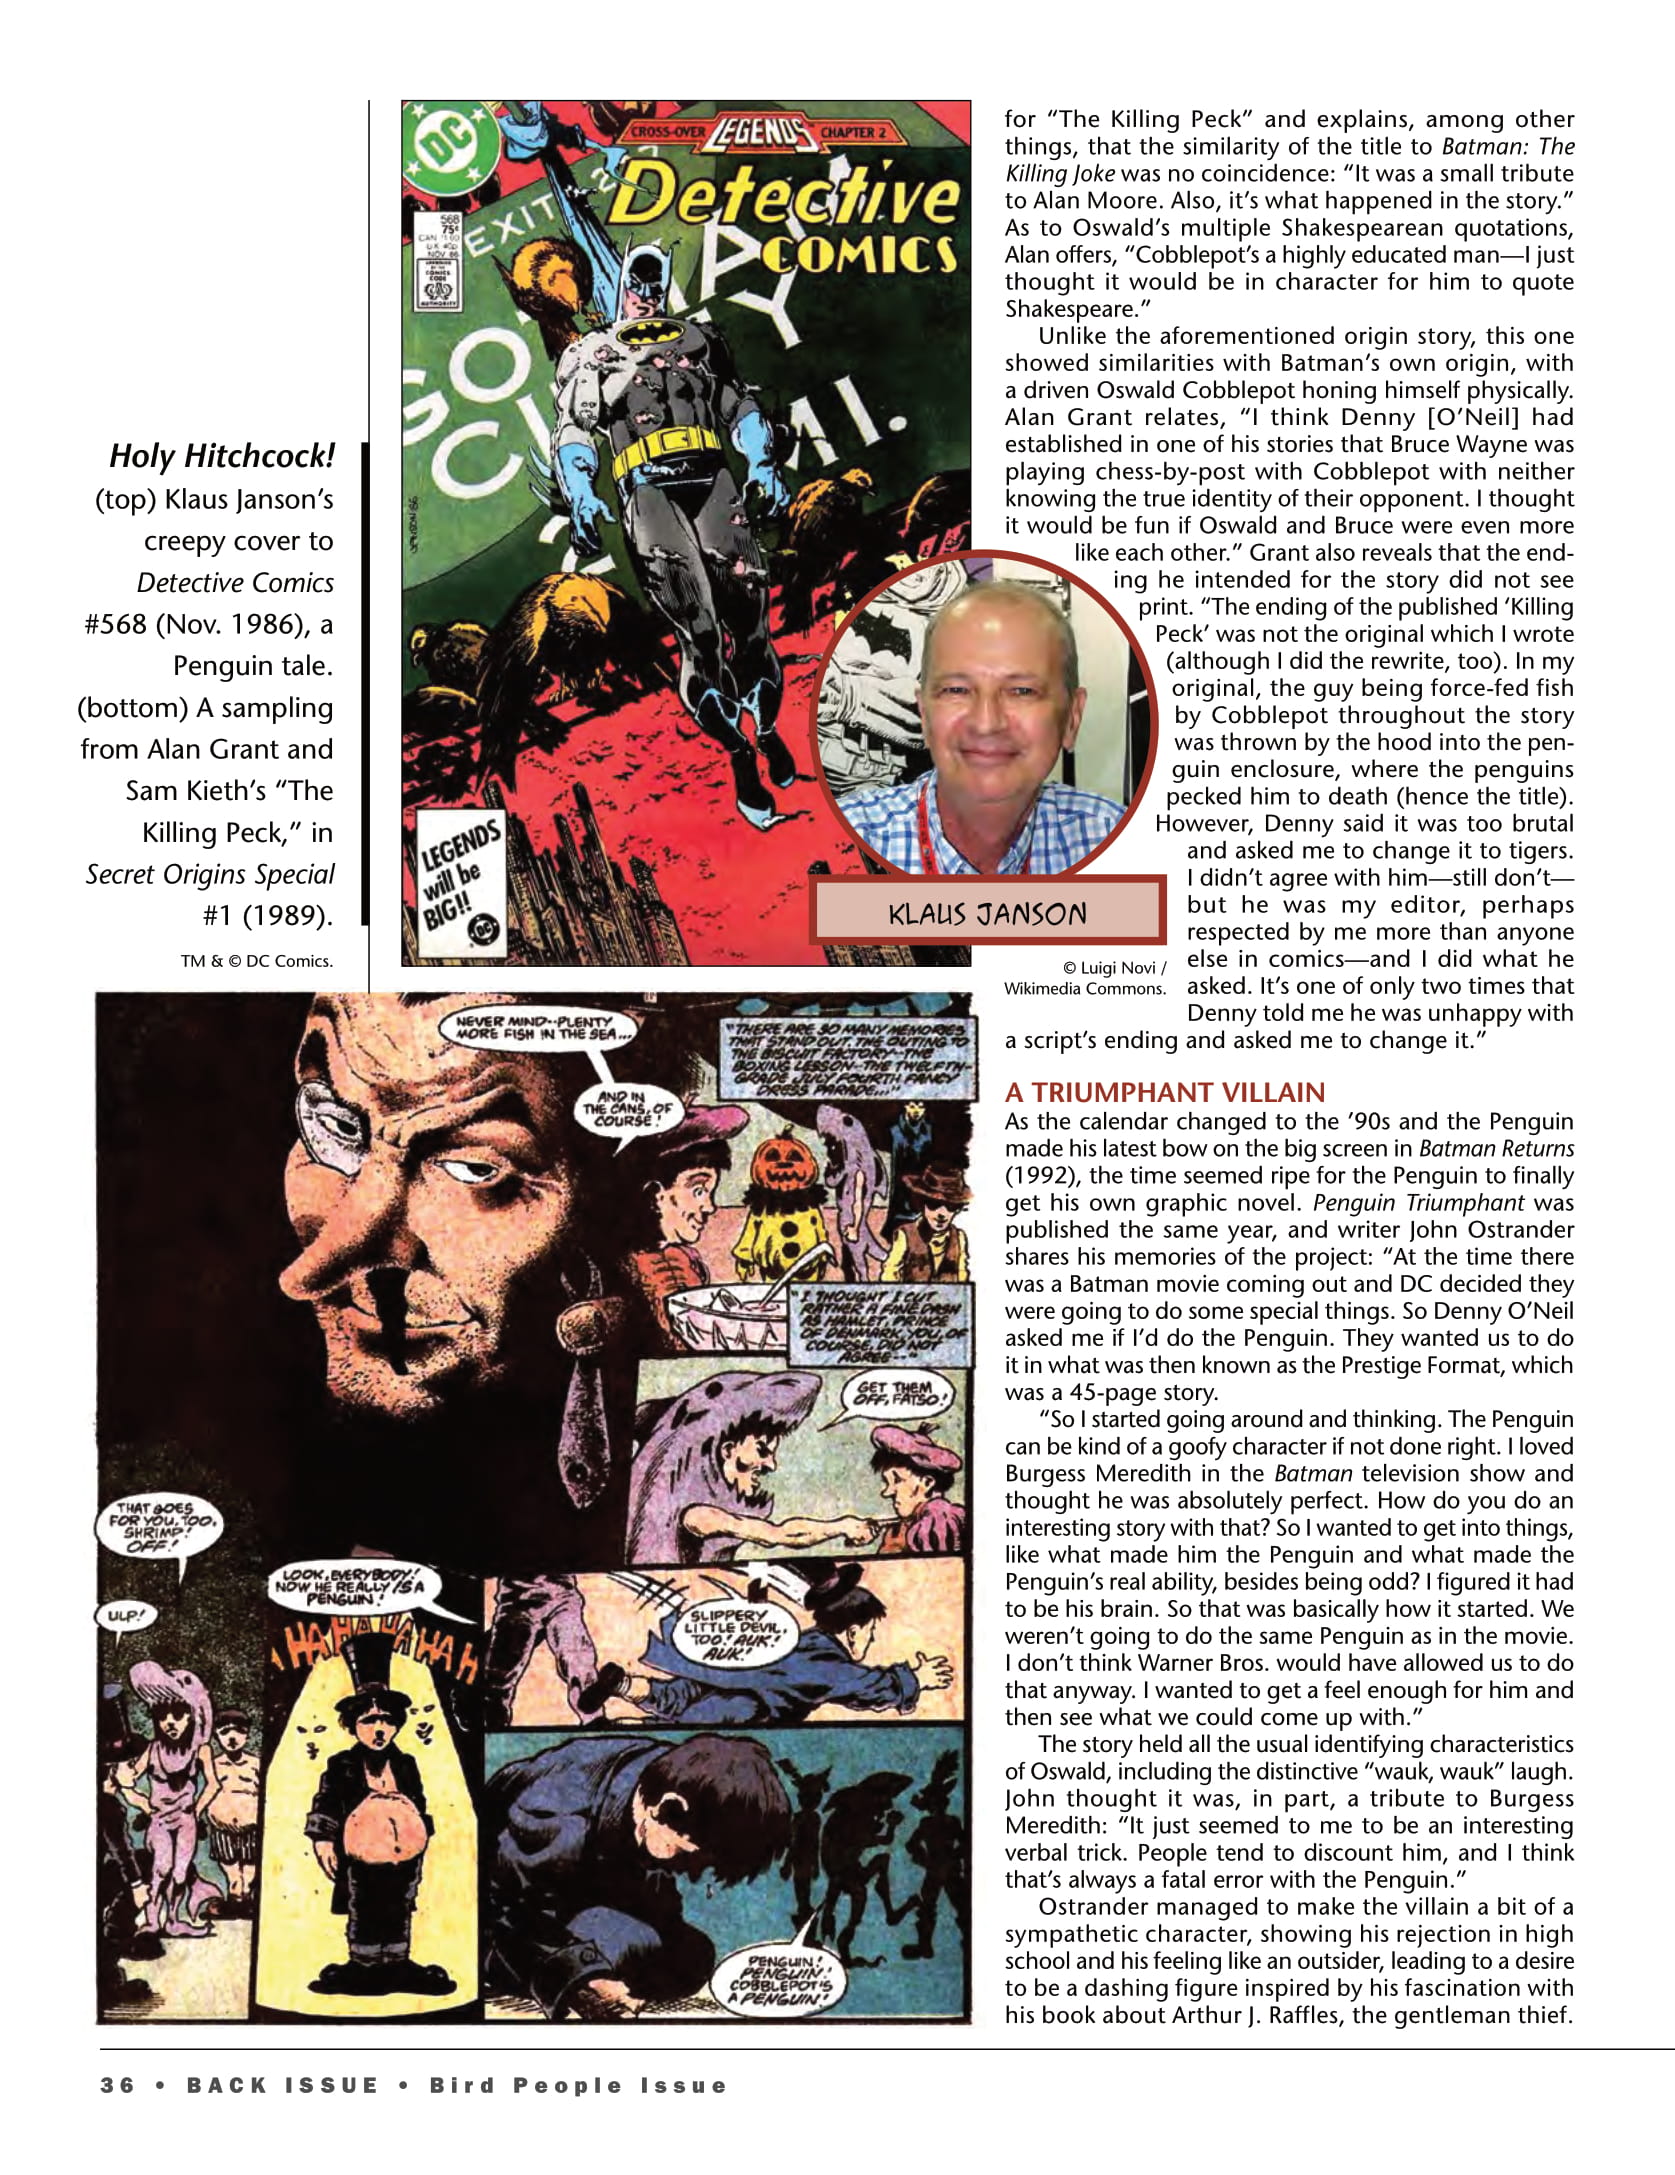 Read online Back Issue comic -  Issue #97 - 38